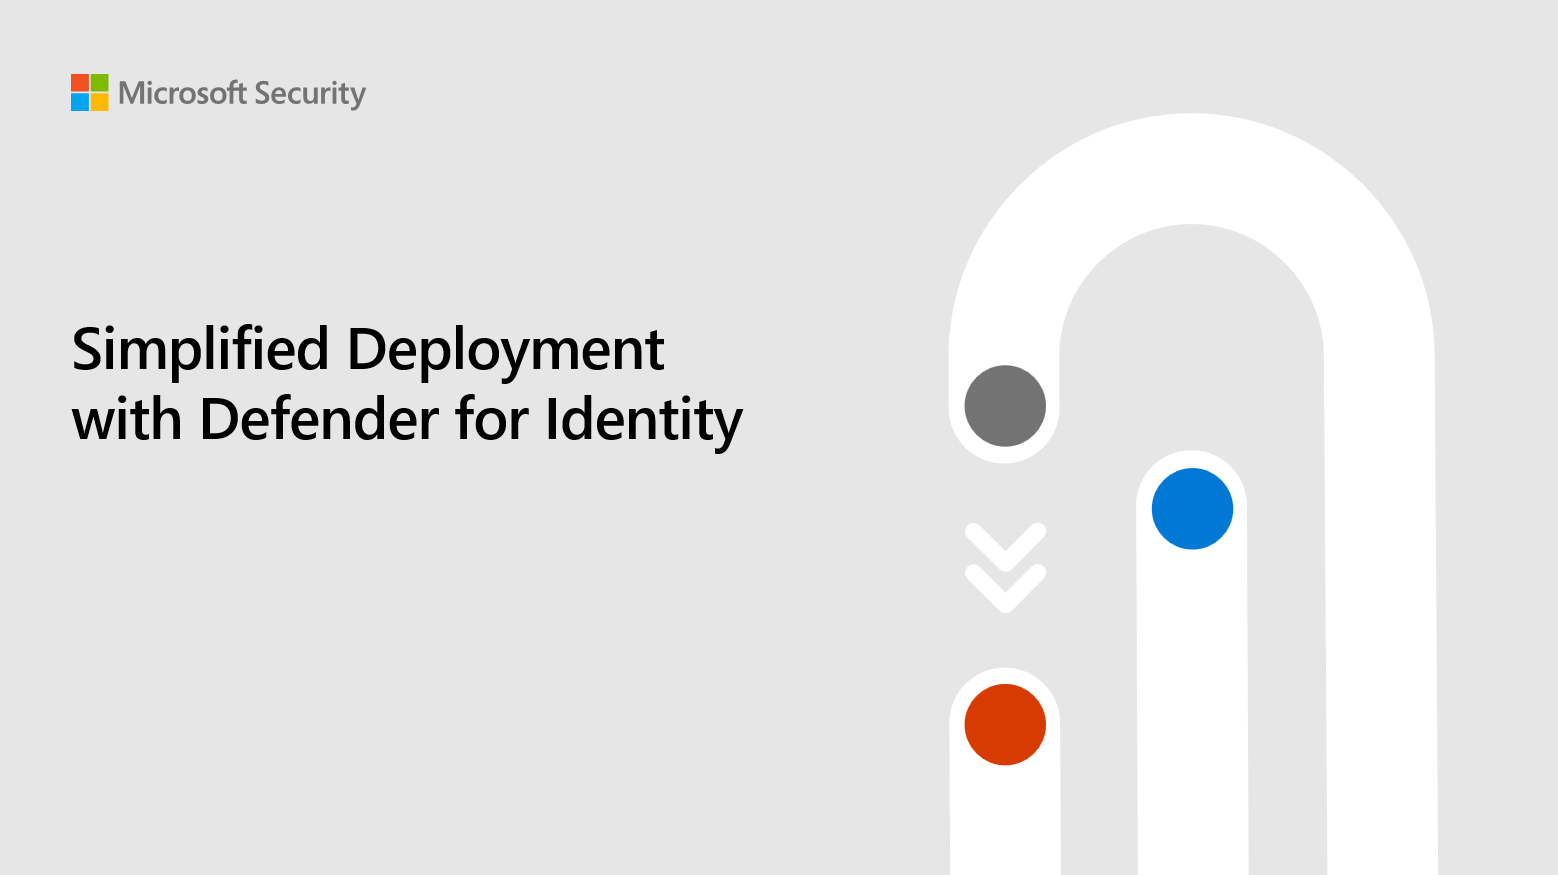 Simplified deployment with Defender for Identity